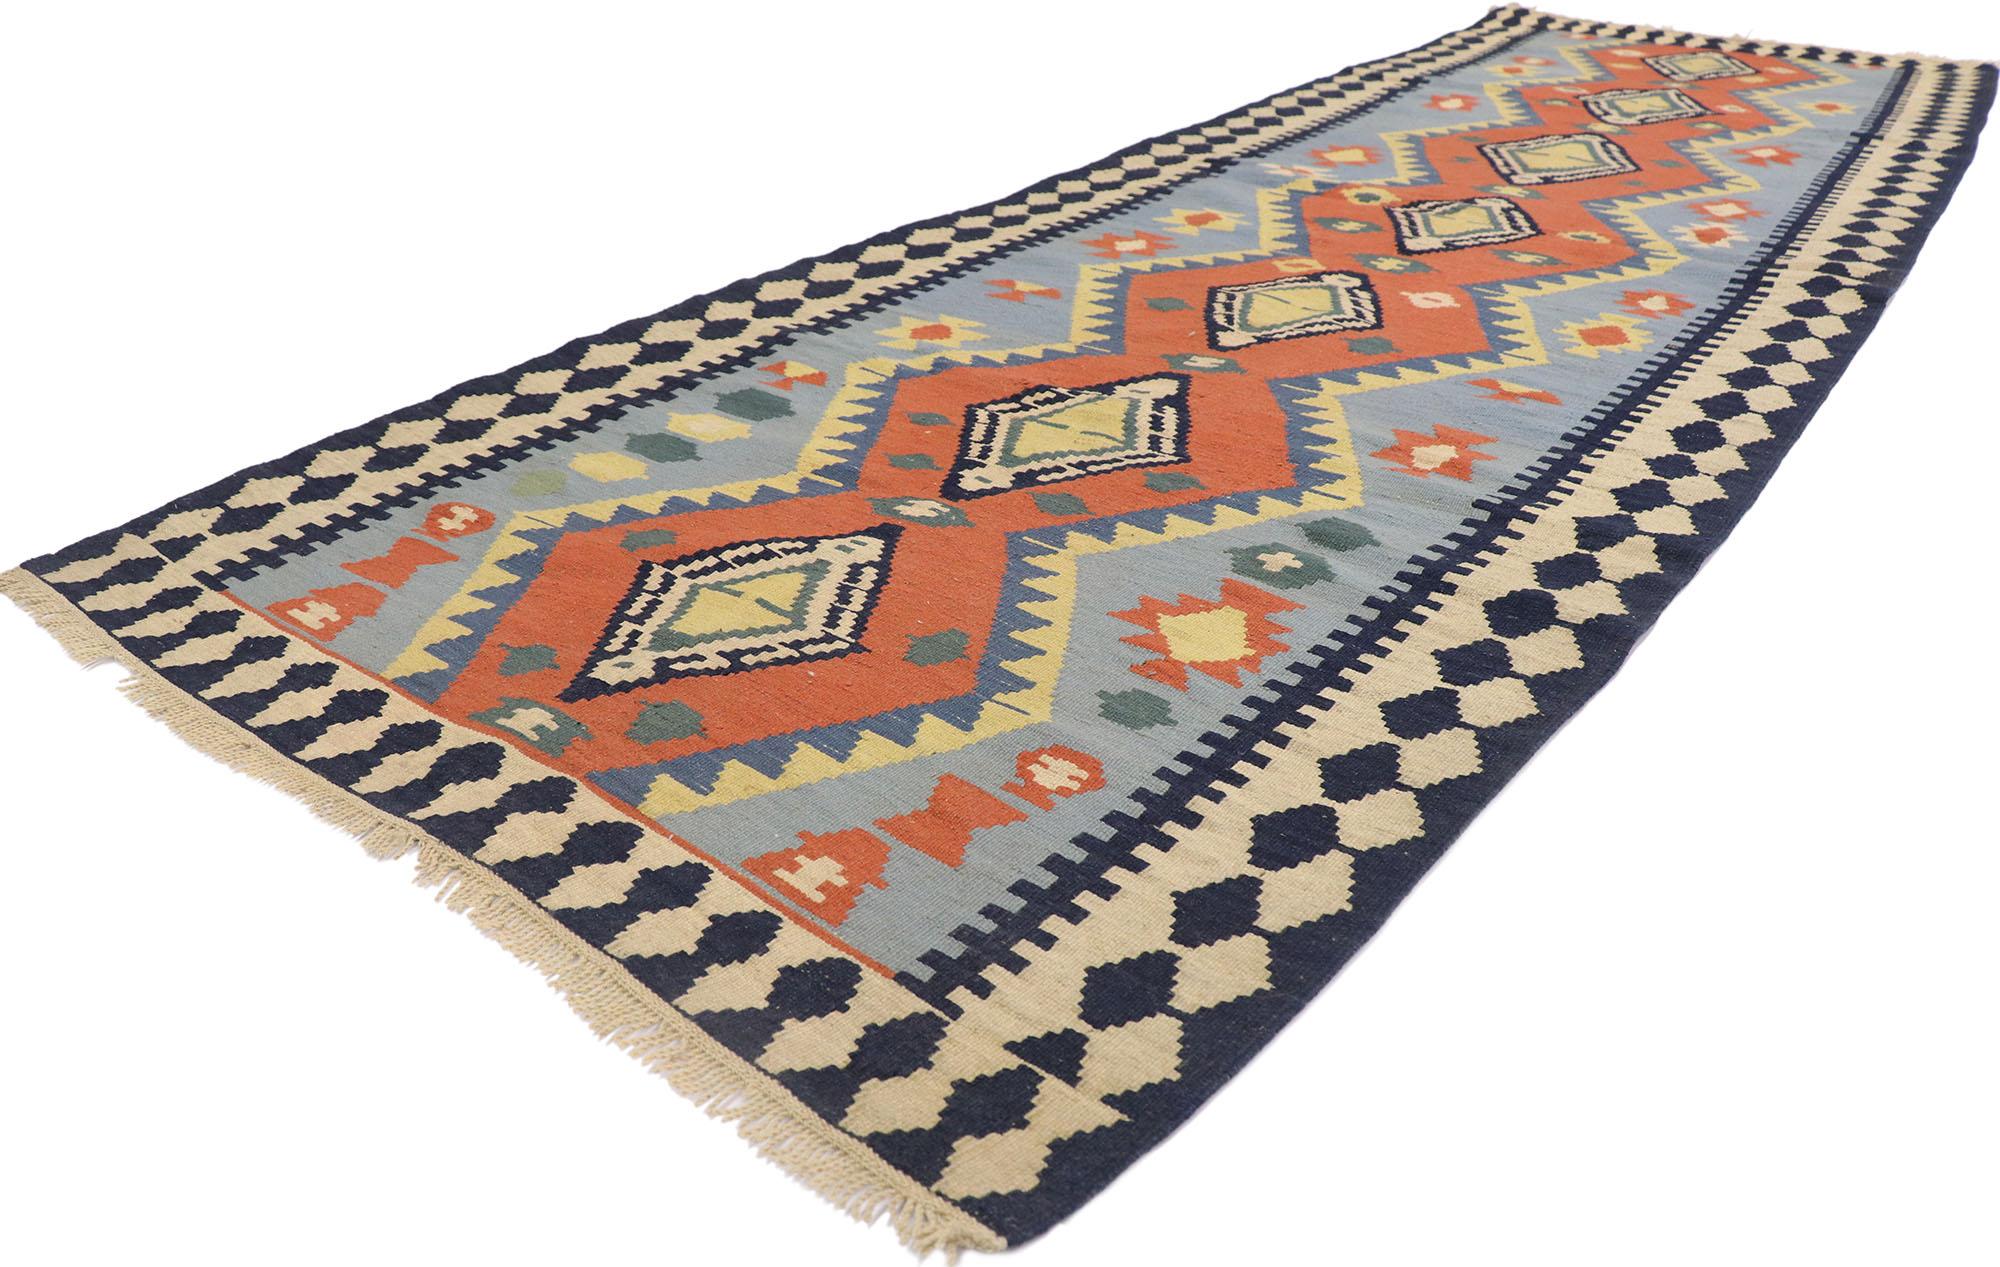 77933 Vintage Persian Shiraz Kilim Rug Runner, 03'06 x 10'09. Persian Shiraz kilim rugs, traditionally crafted by nomadic and semi-nomadic tribes in Iran's southwestern Fars province near Shiraz, are handwoven textiles known for their flatweave